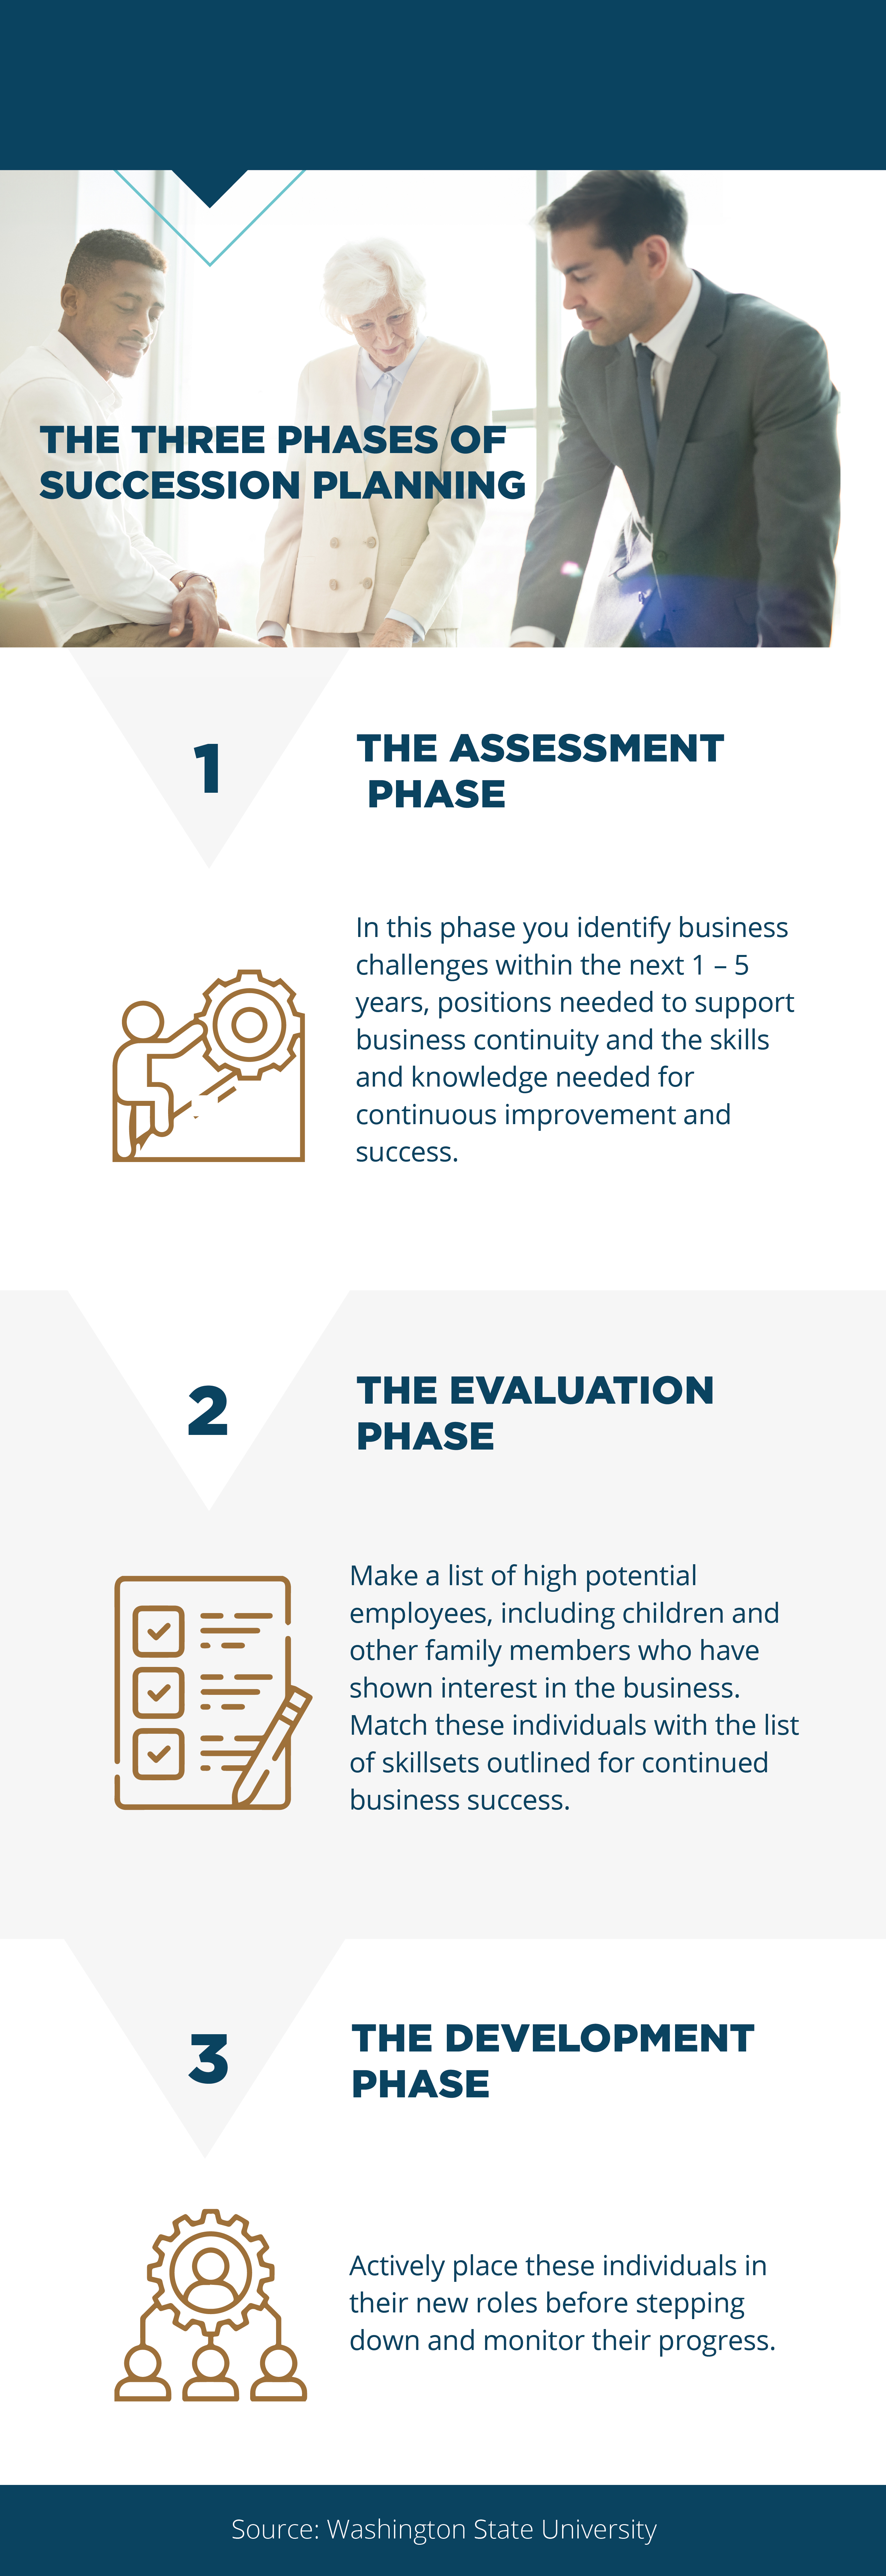 The three phases of succession planning for an organization